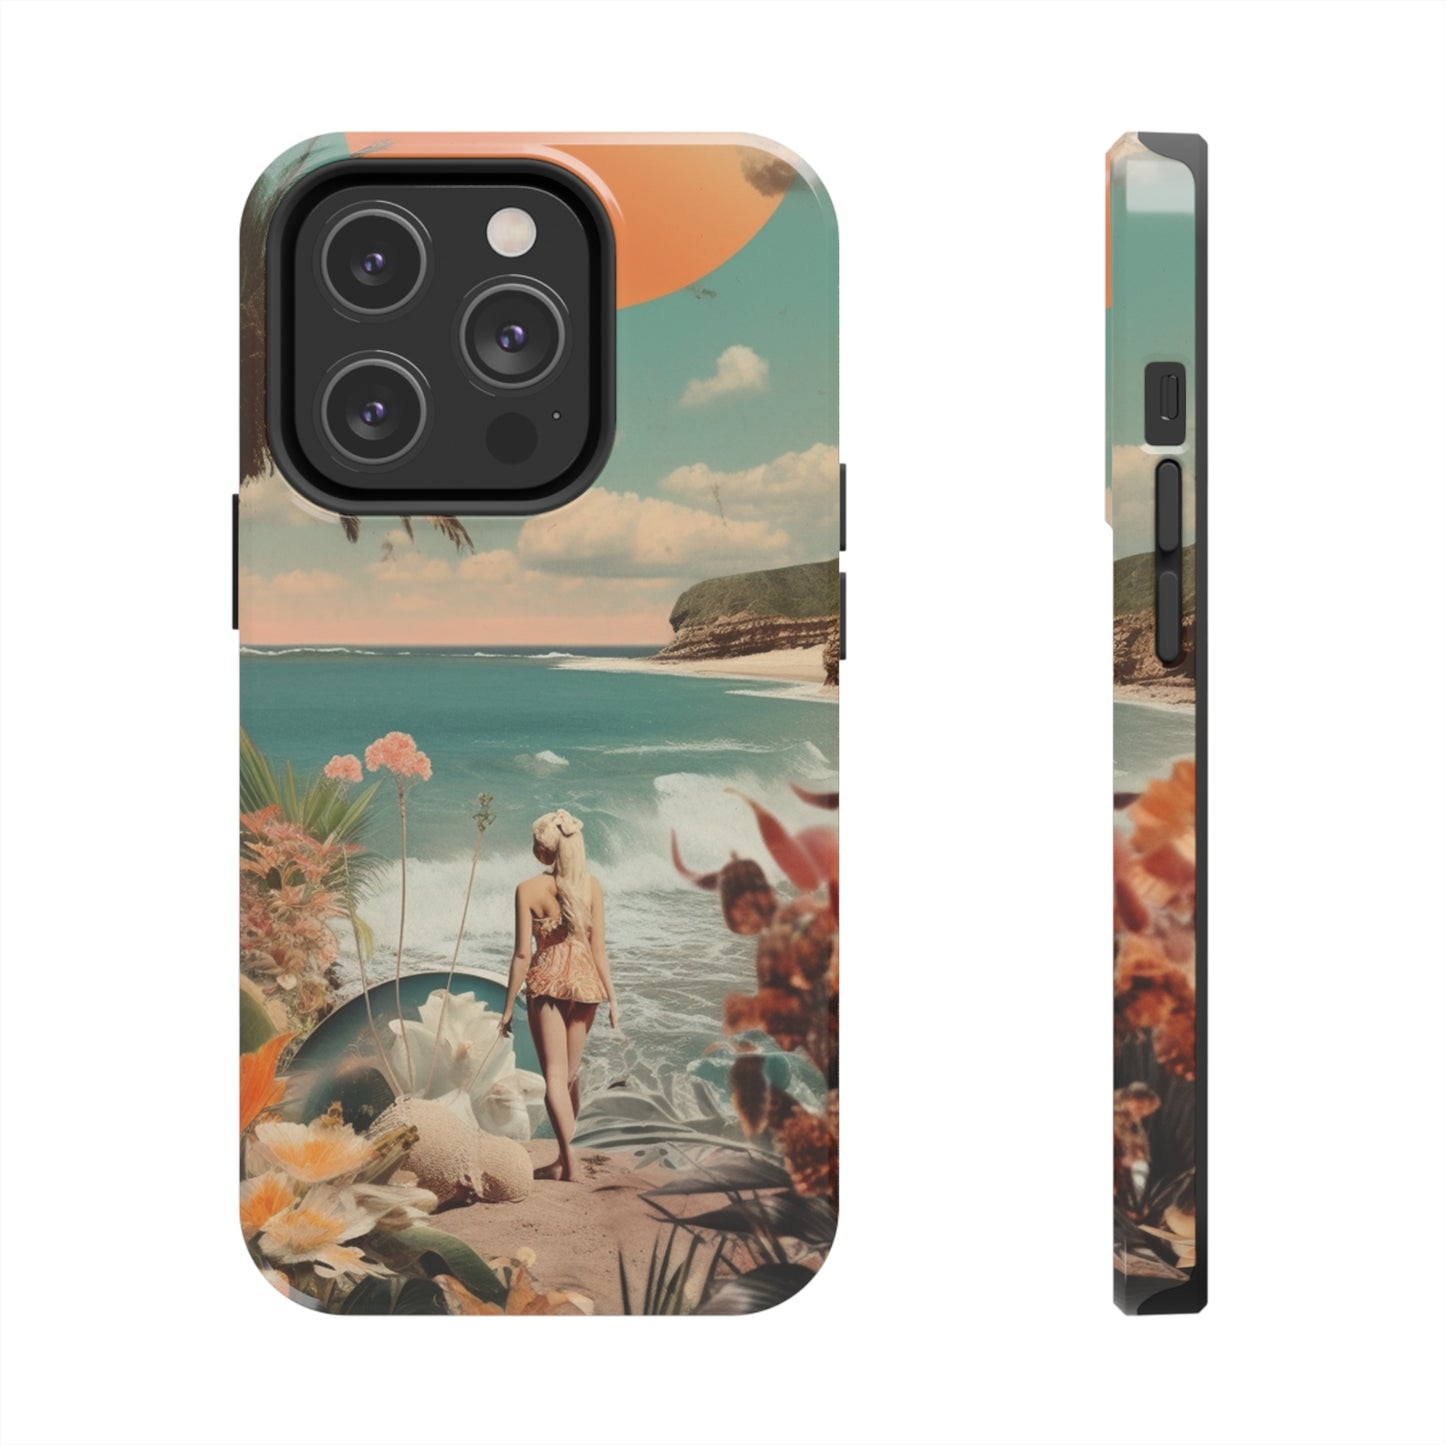 Relaxing iPhone Protective Case for Tropical Vibes